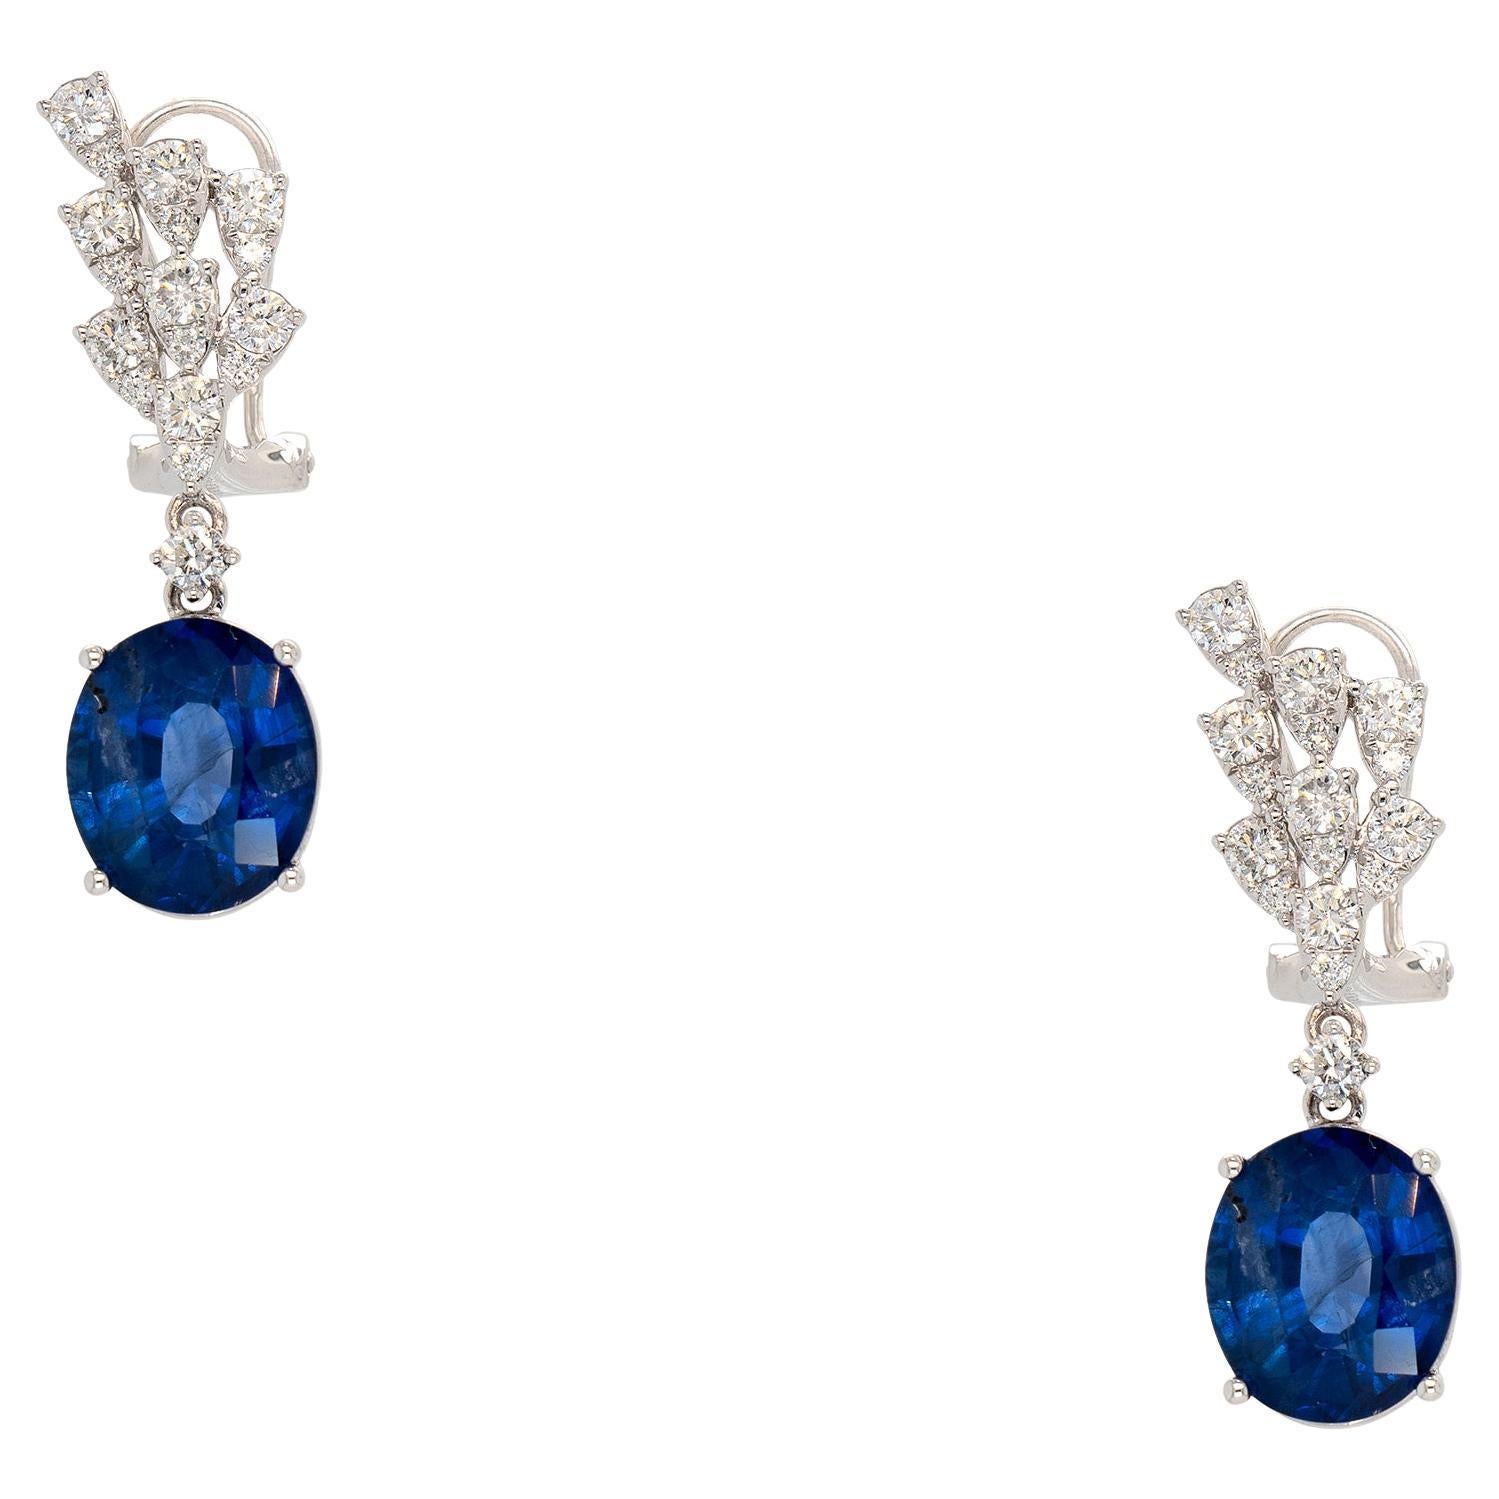 18k White Gold 10.92ct Sapphire with 1.14ct Round Brilliant Diamond Earrings